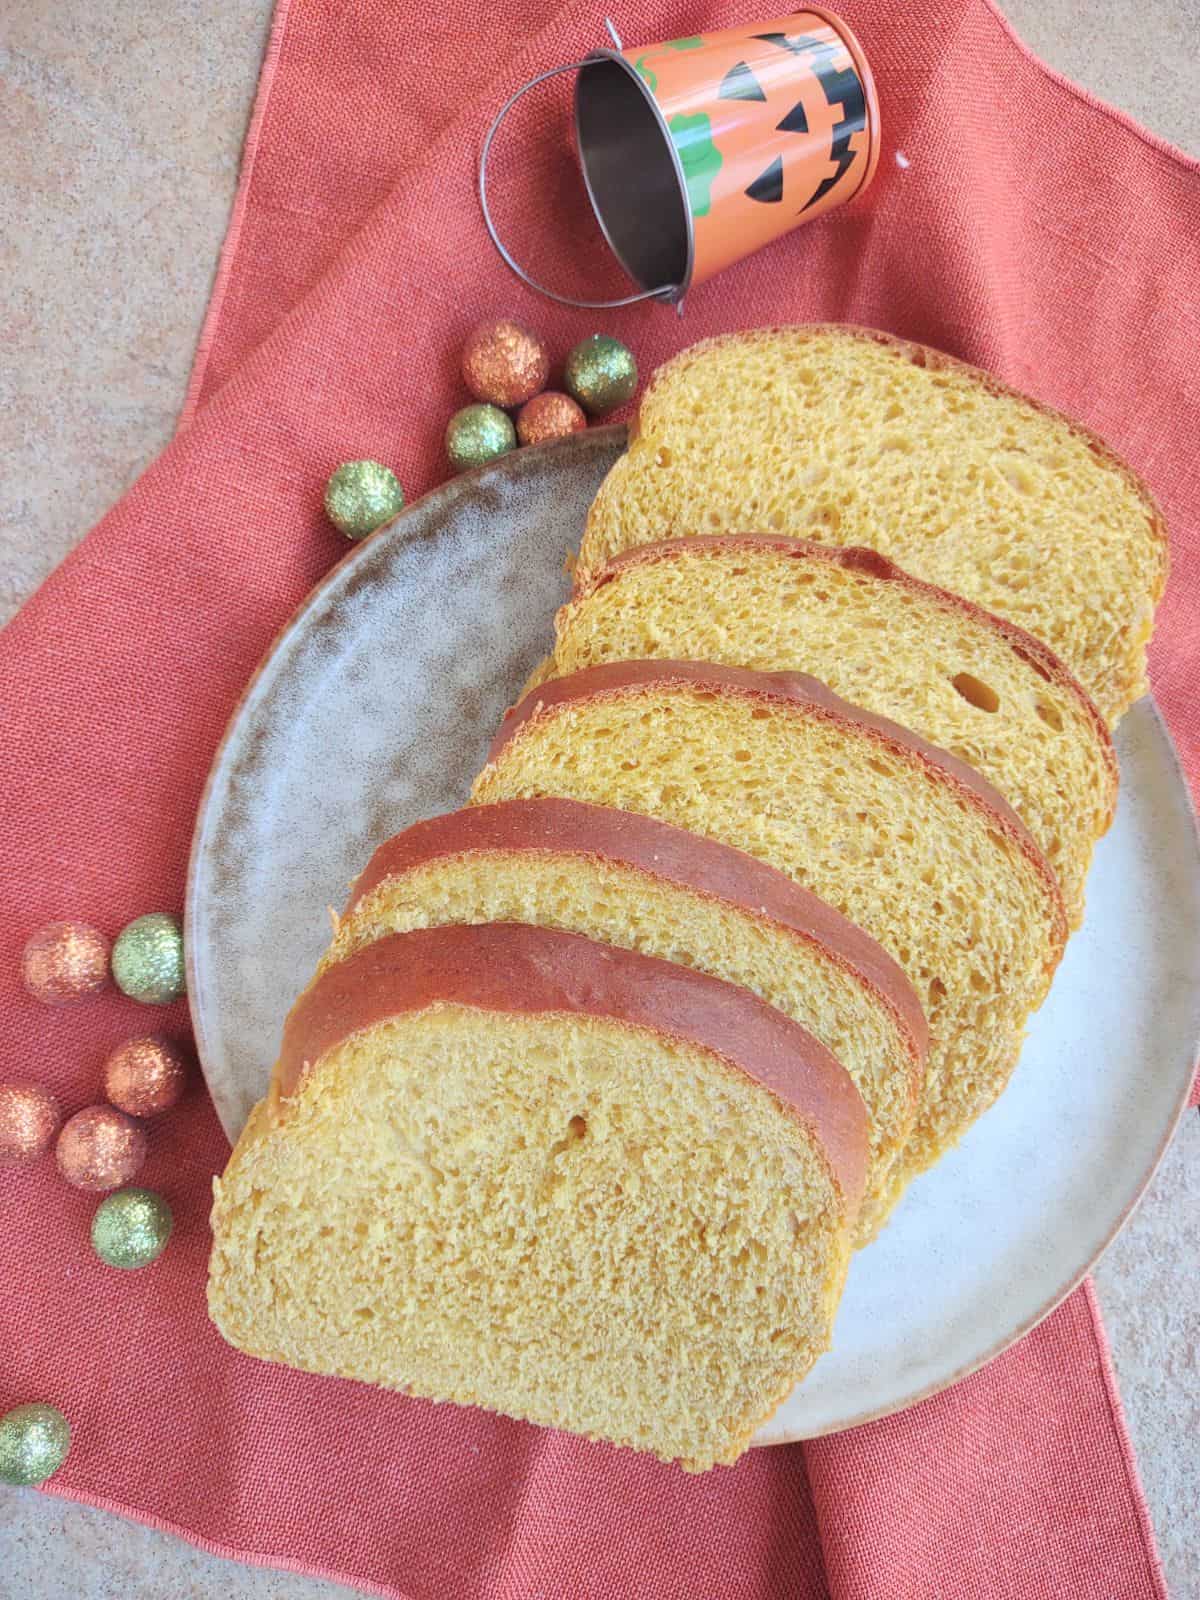 Slices of pumpkin yeast bread on a gray and brown plate on top of an orange towel.